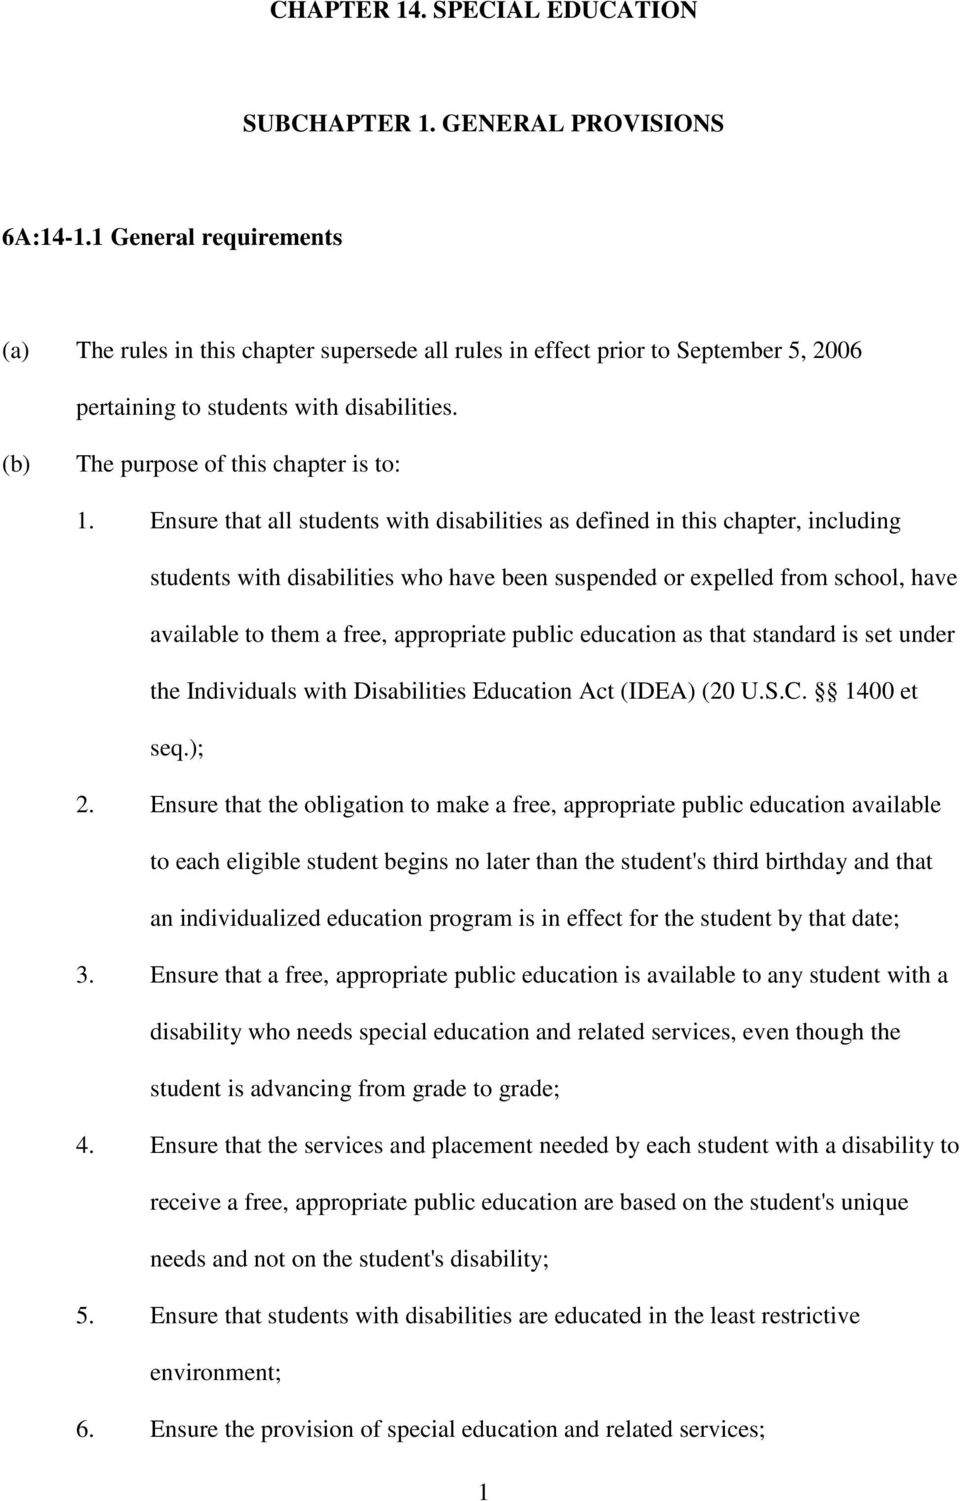 Ensure that all students with disabilities as defined in this chapter, including students with disabilities who have been suspended or expelled from school, have available to them a free, appropriate